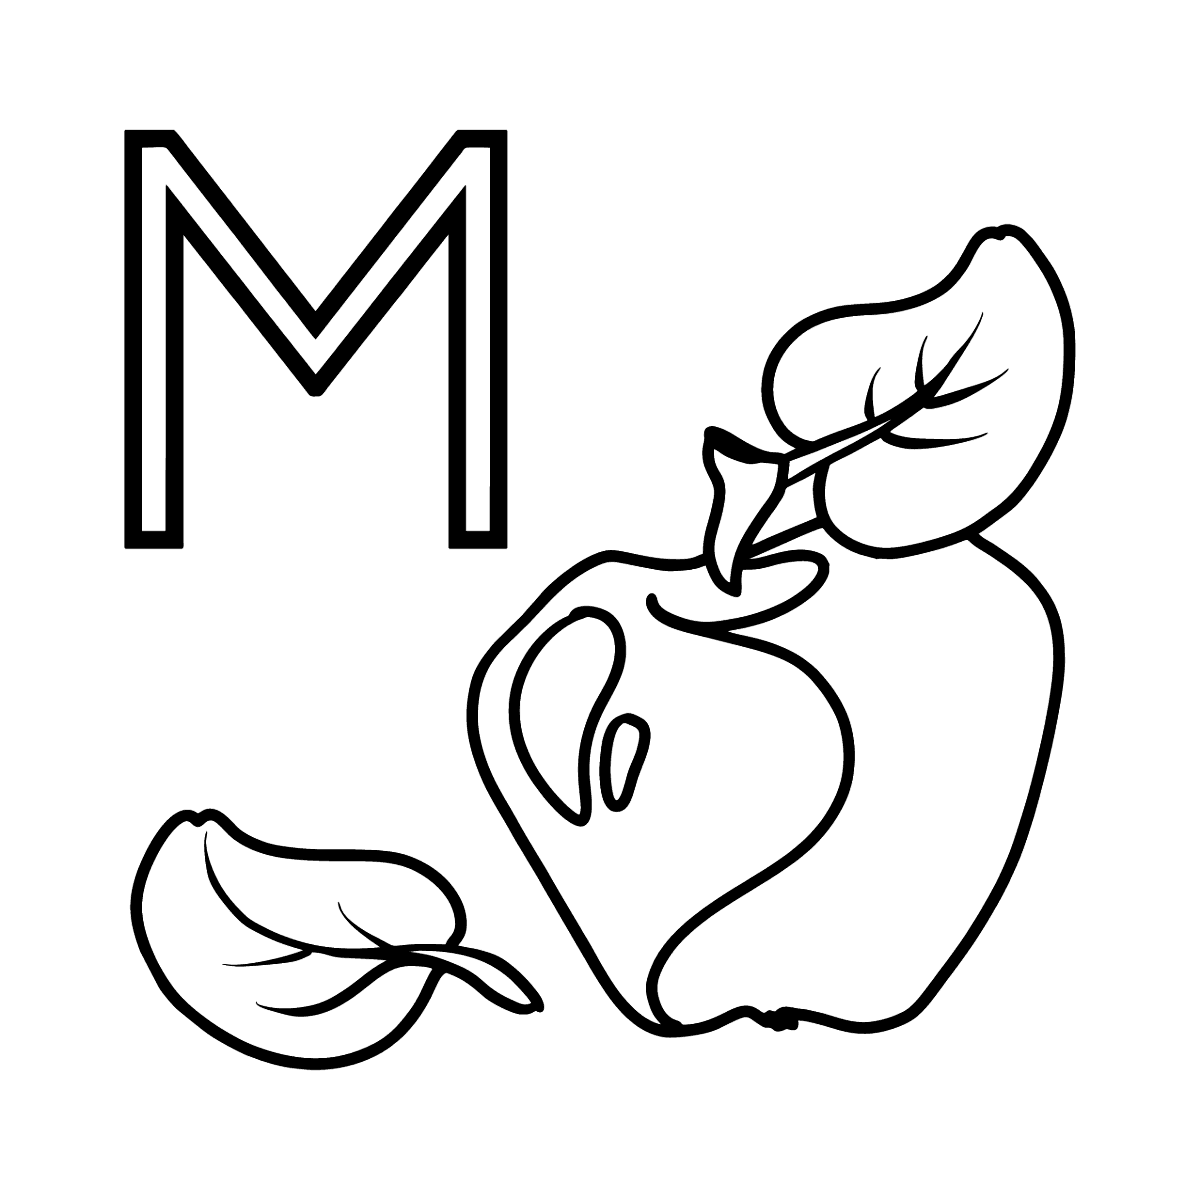 Spanish Letter M coloring pages ♥ Print and Online Free!